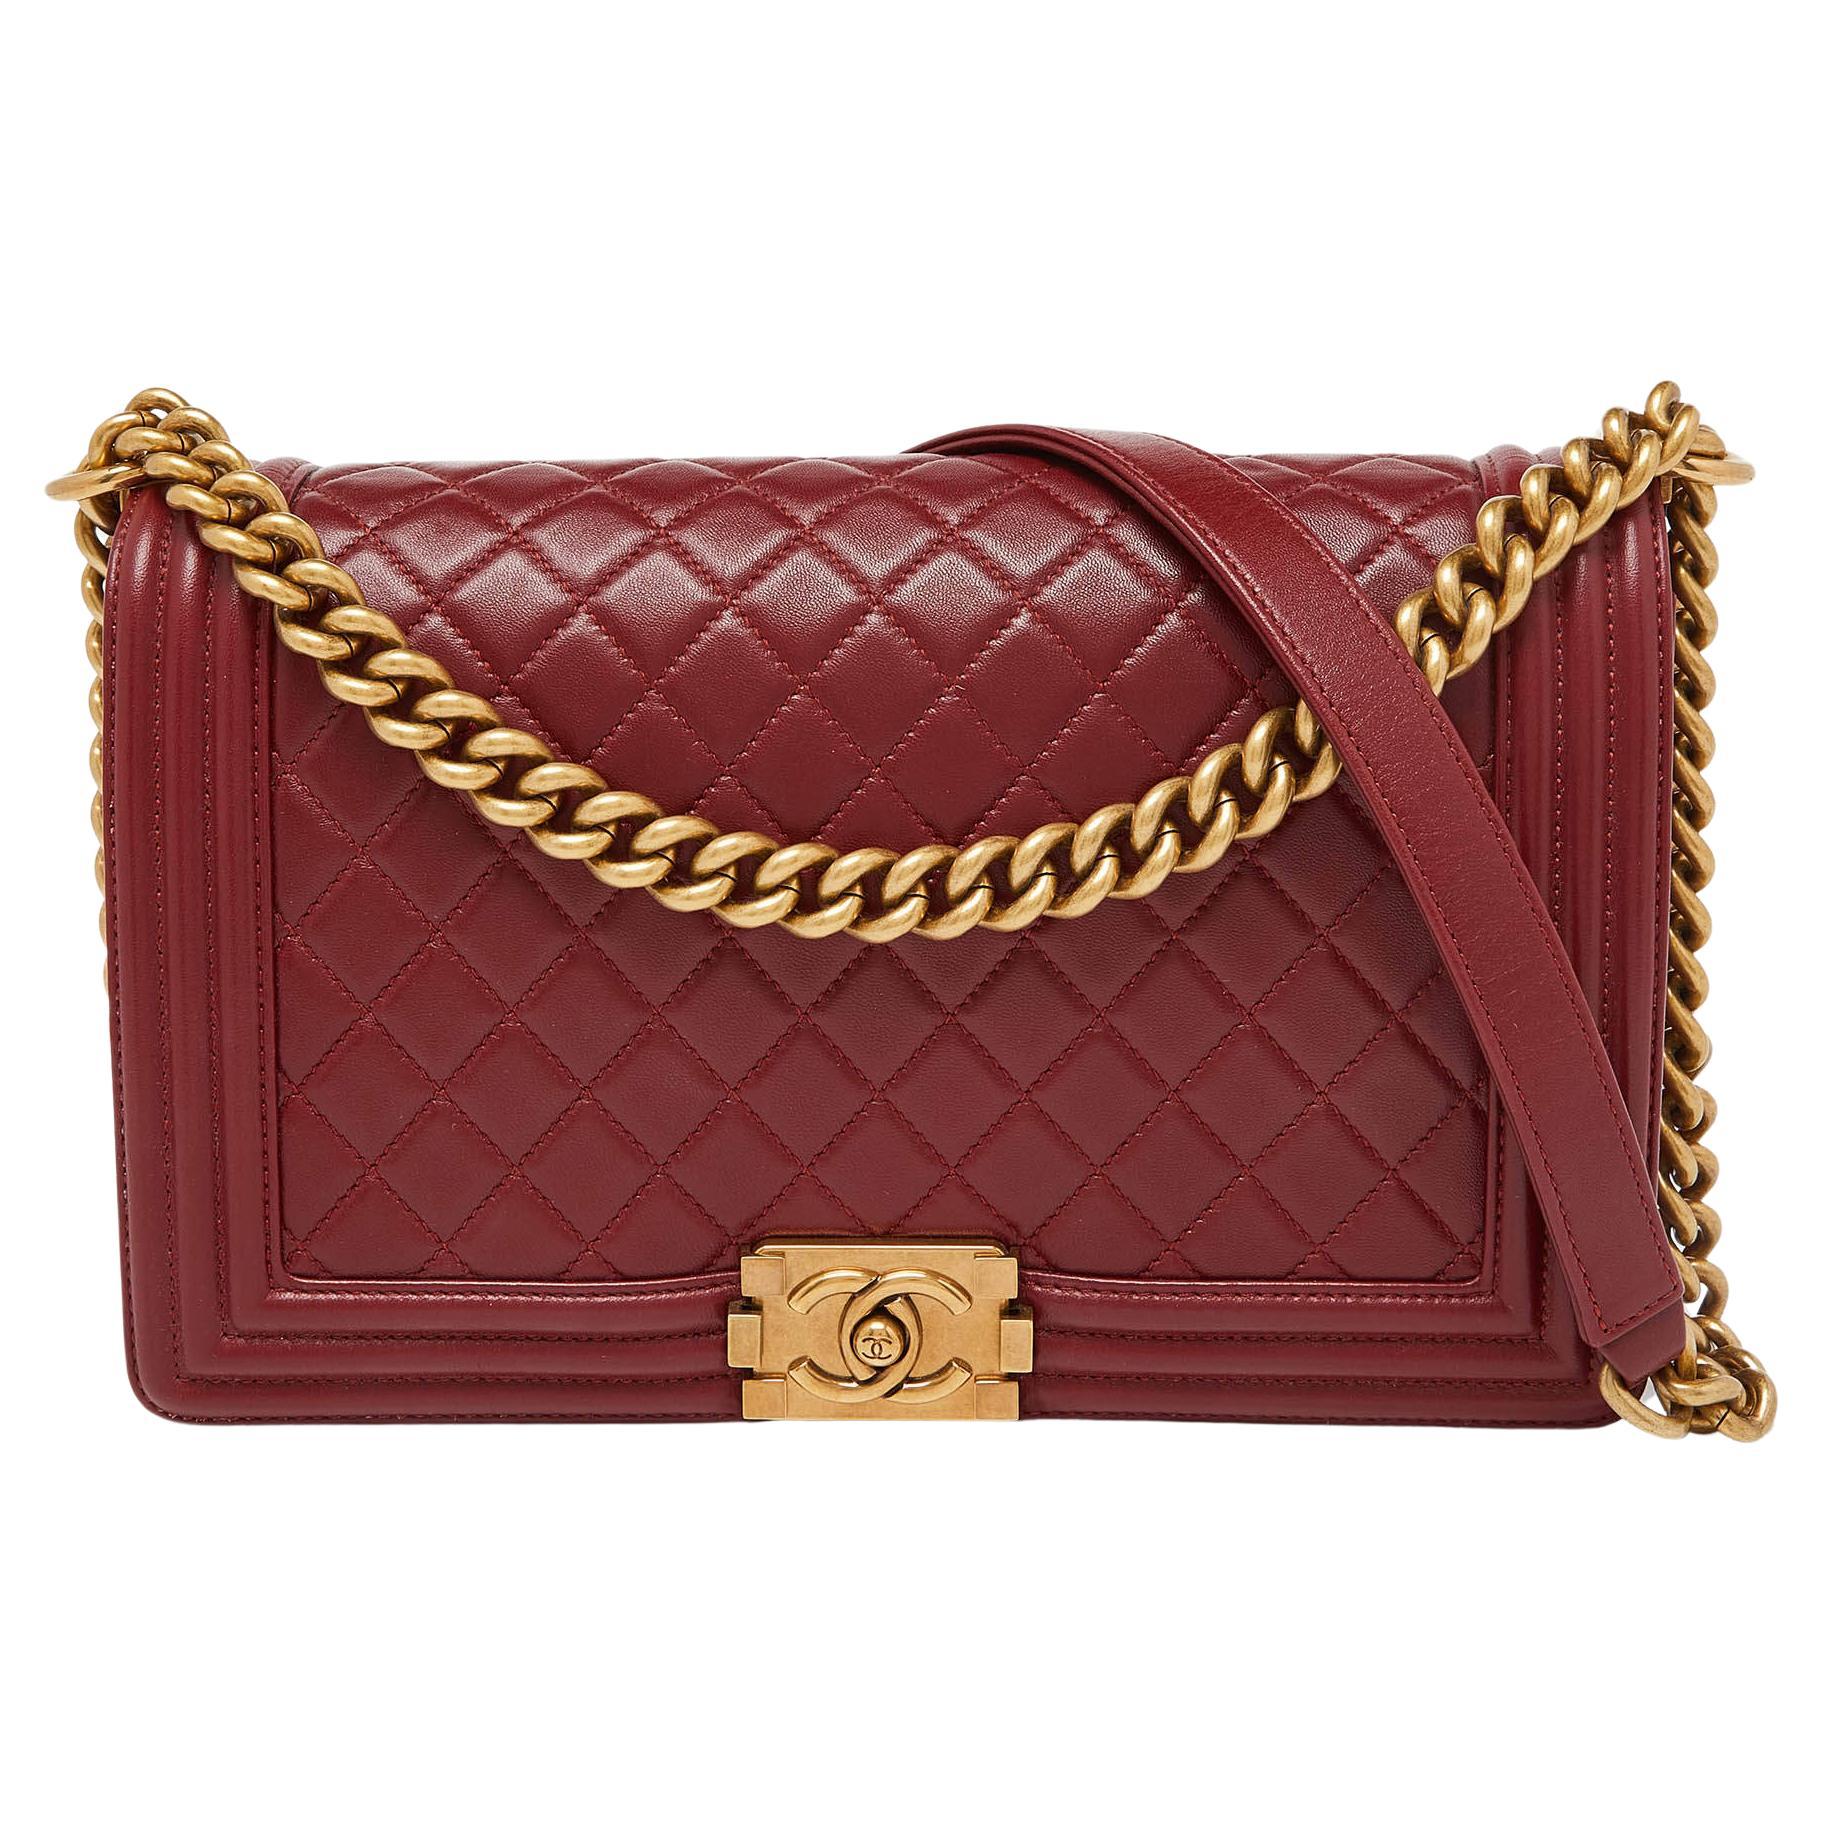 Chanel Red Quilted Leather New Medium Boy Shoulder Bag For Sale